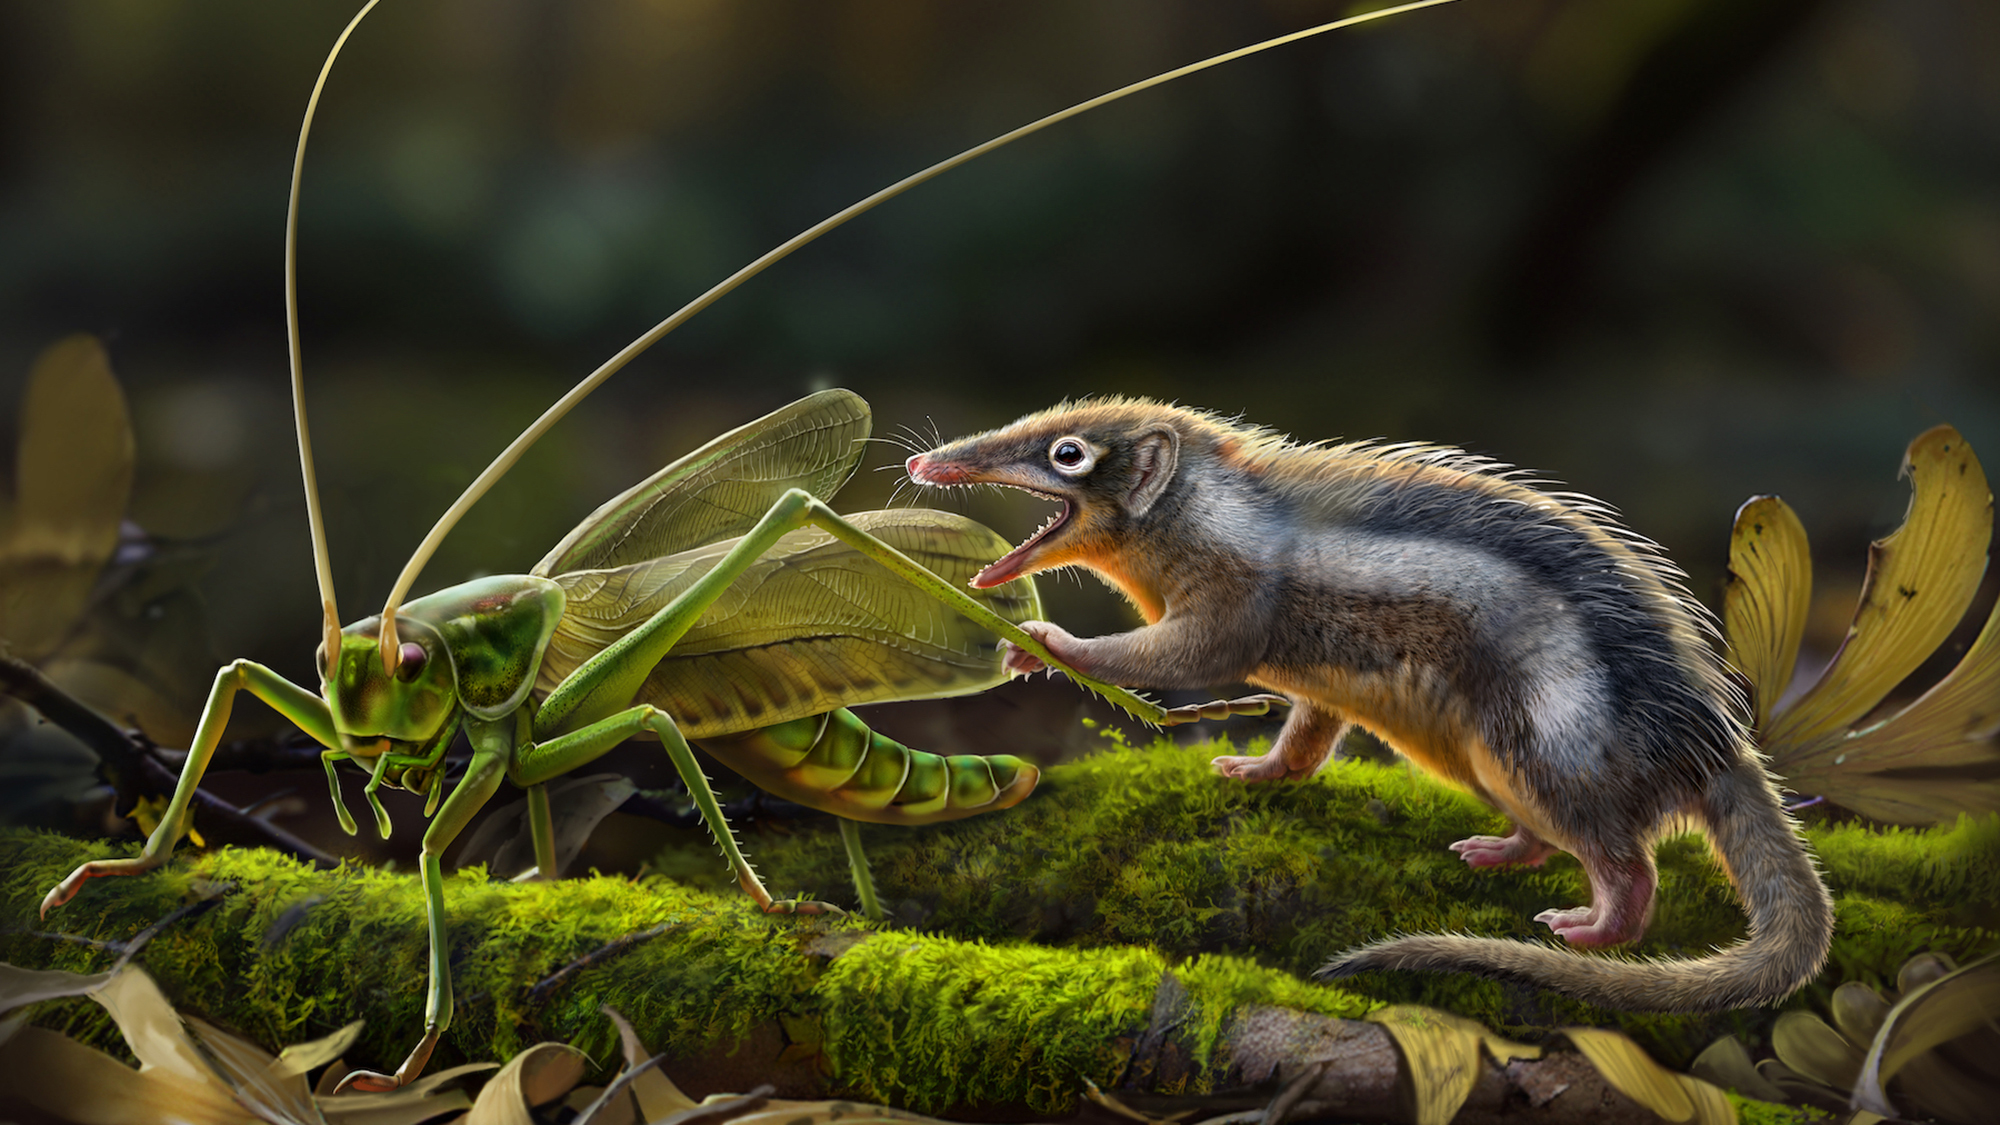 New fossils of tiny, toothy early mammals could be a major missing link